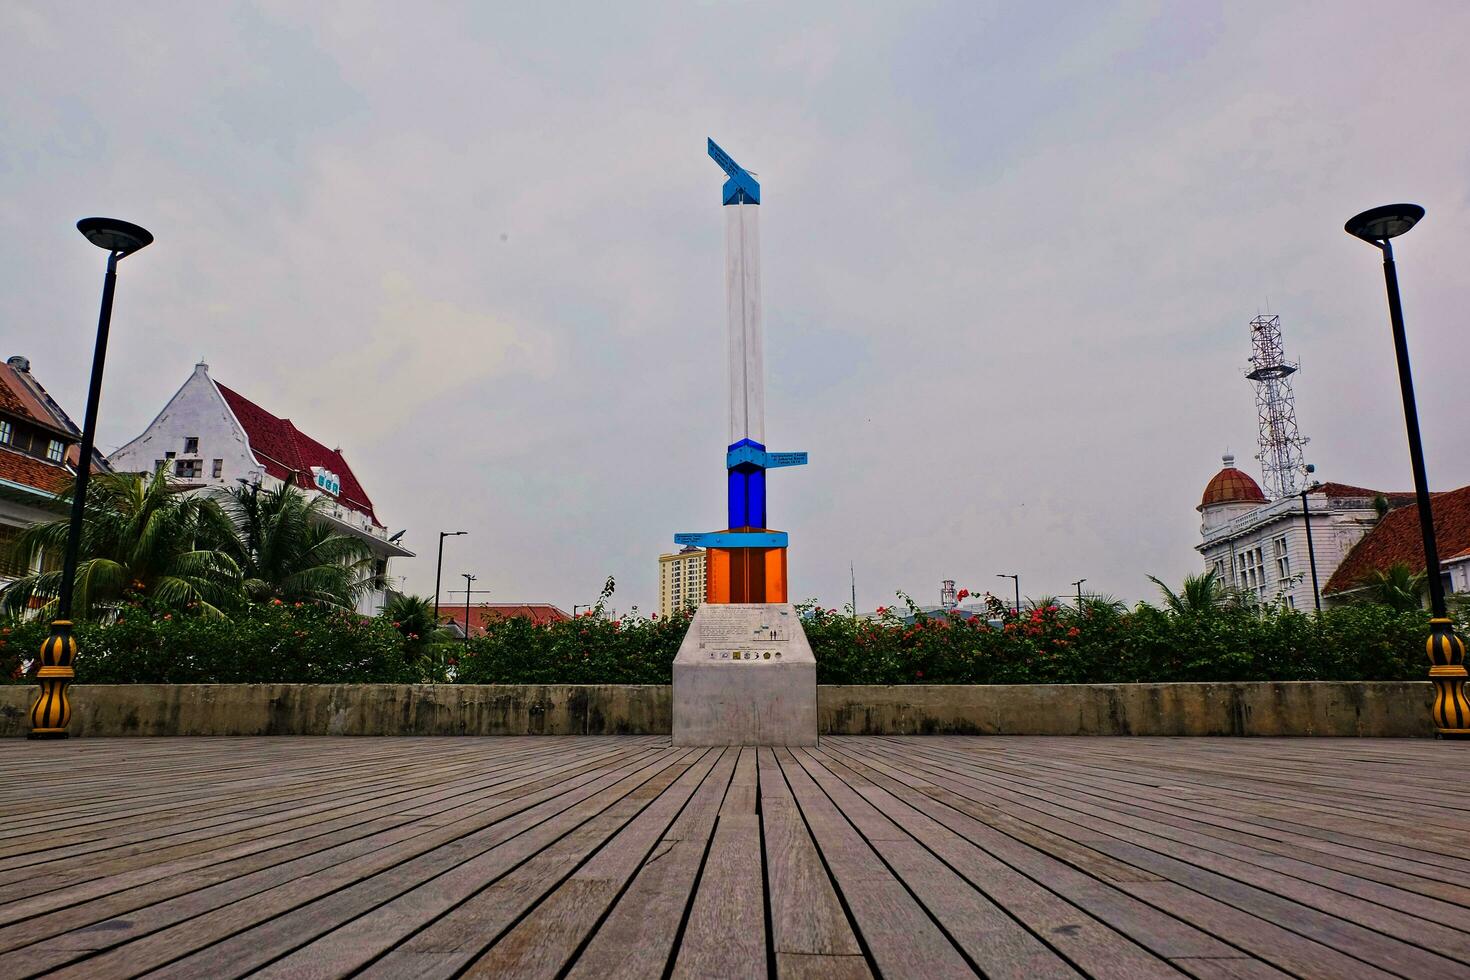 May 18, 2023, the city of Jakarta Indonesia, an info graphic monument or monument depicting land subsidence in several areas in the city of Jakarta in the last 50 years, photo